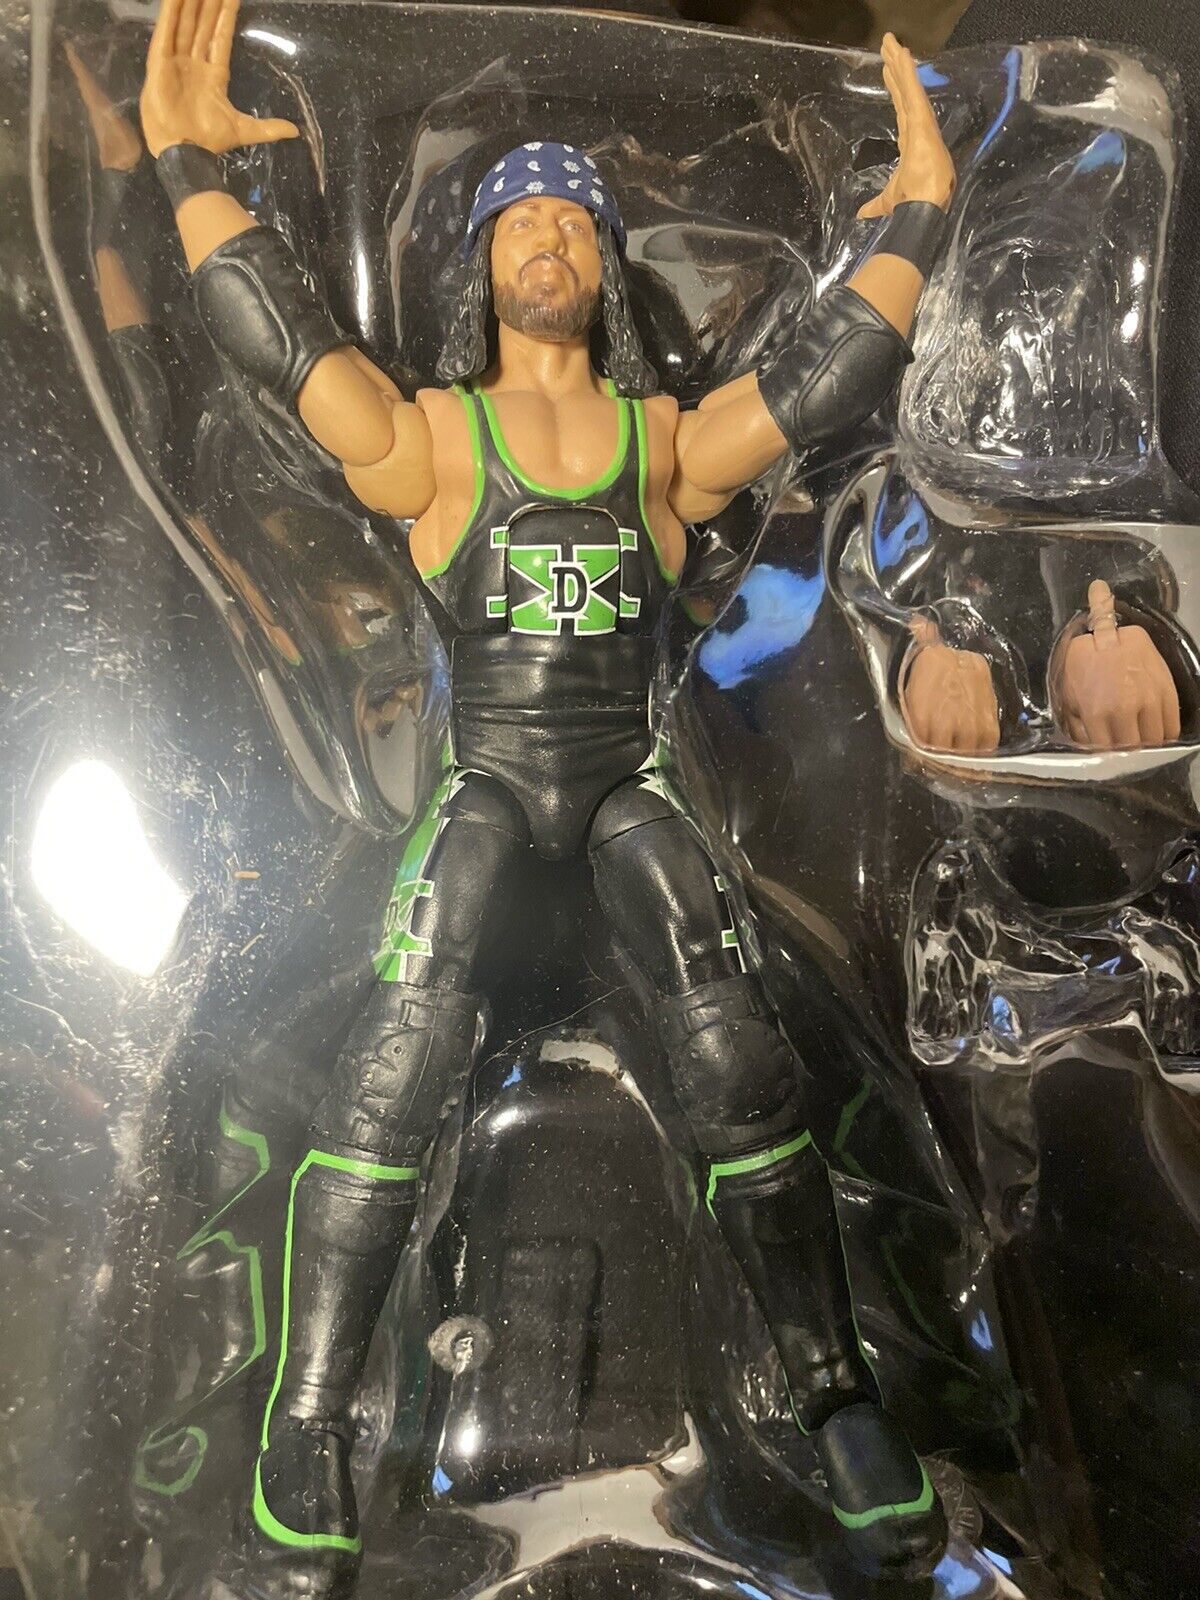 wwe elite custom DX version xpac action figure. Comes with more accessories plus